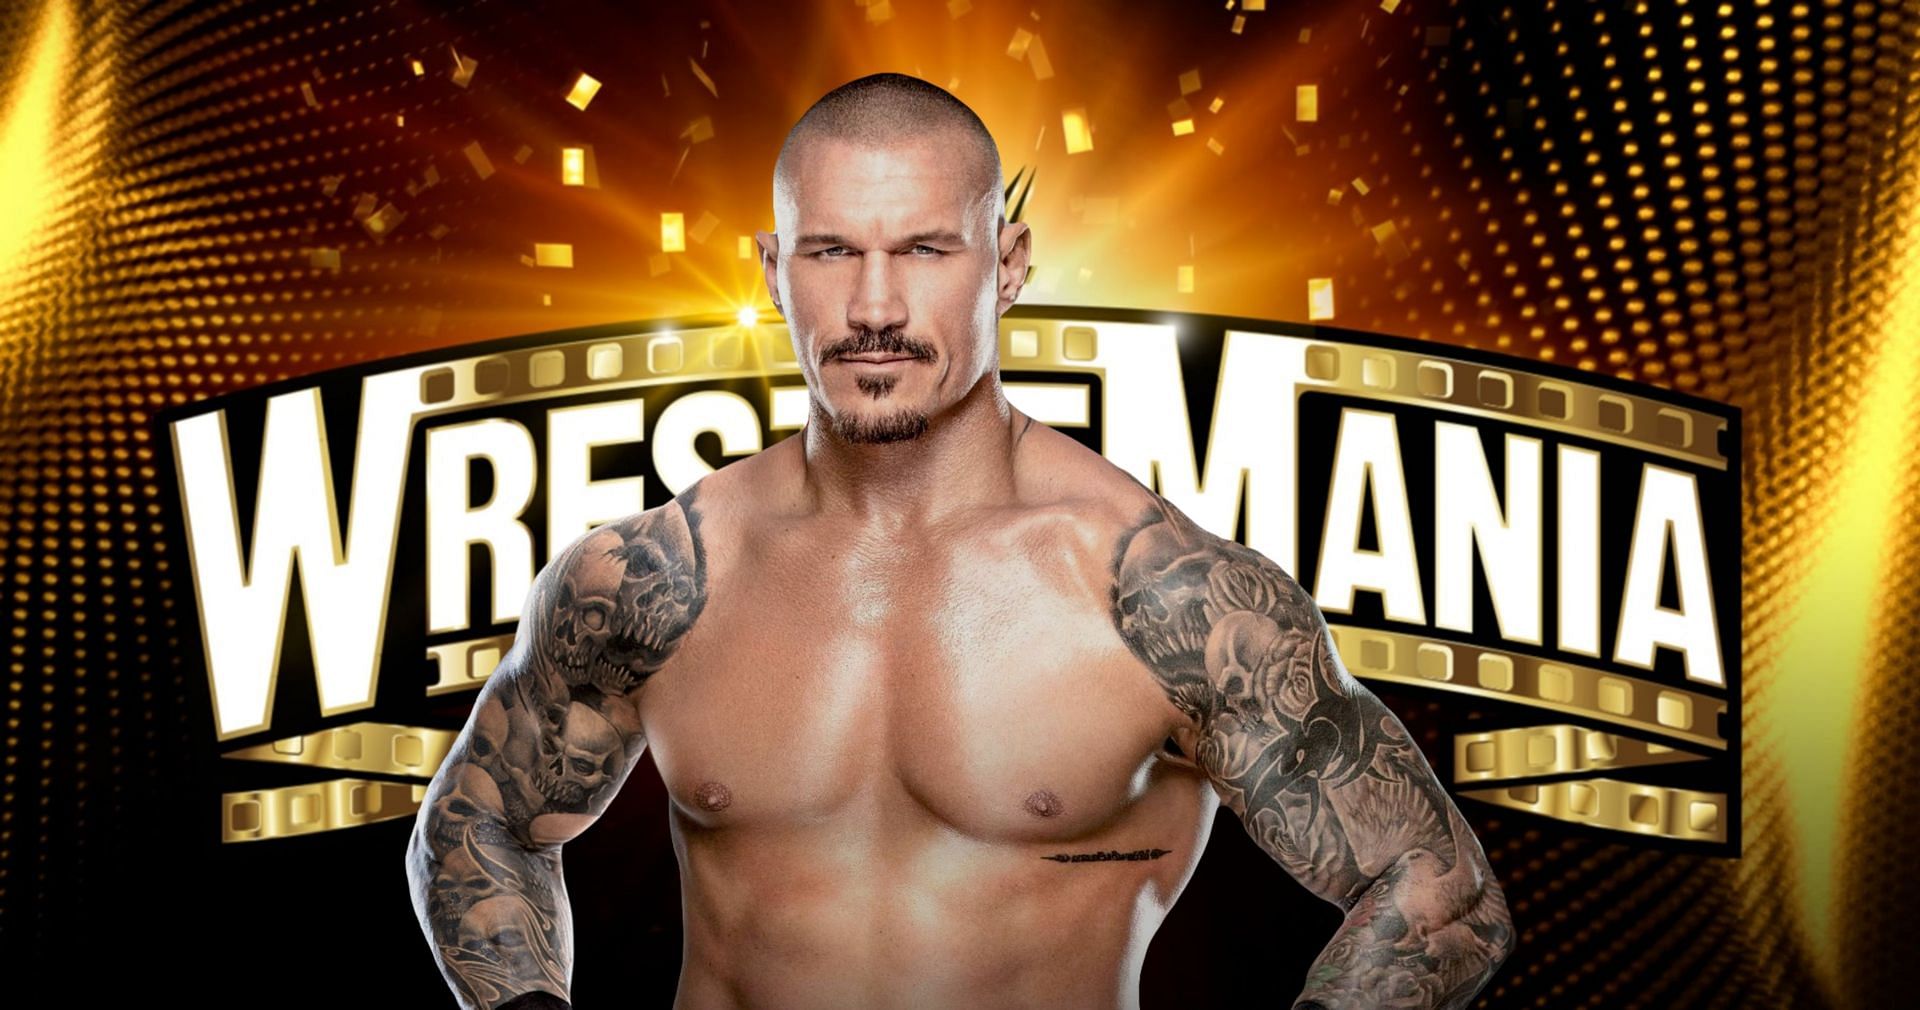 Randy Orton is one of the greatest WWE Superstars of all time